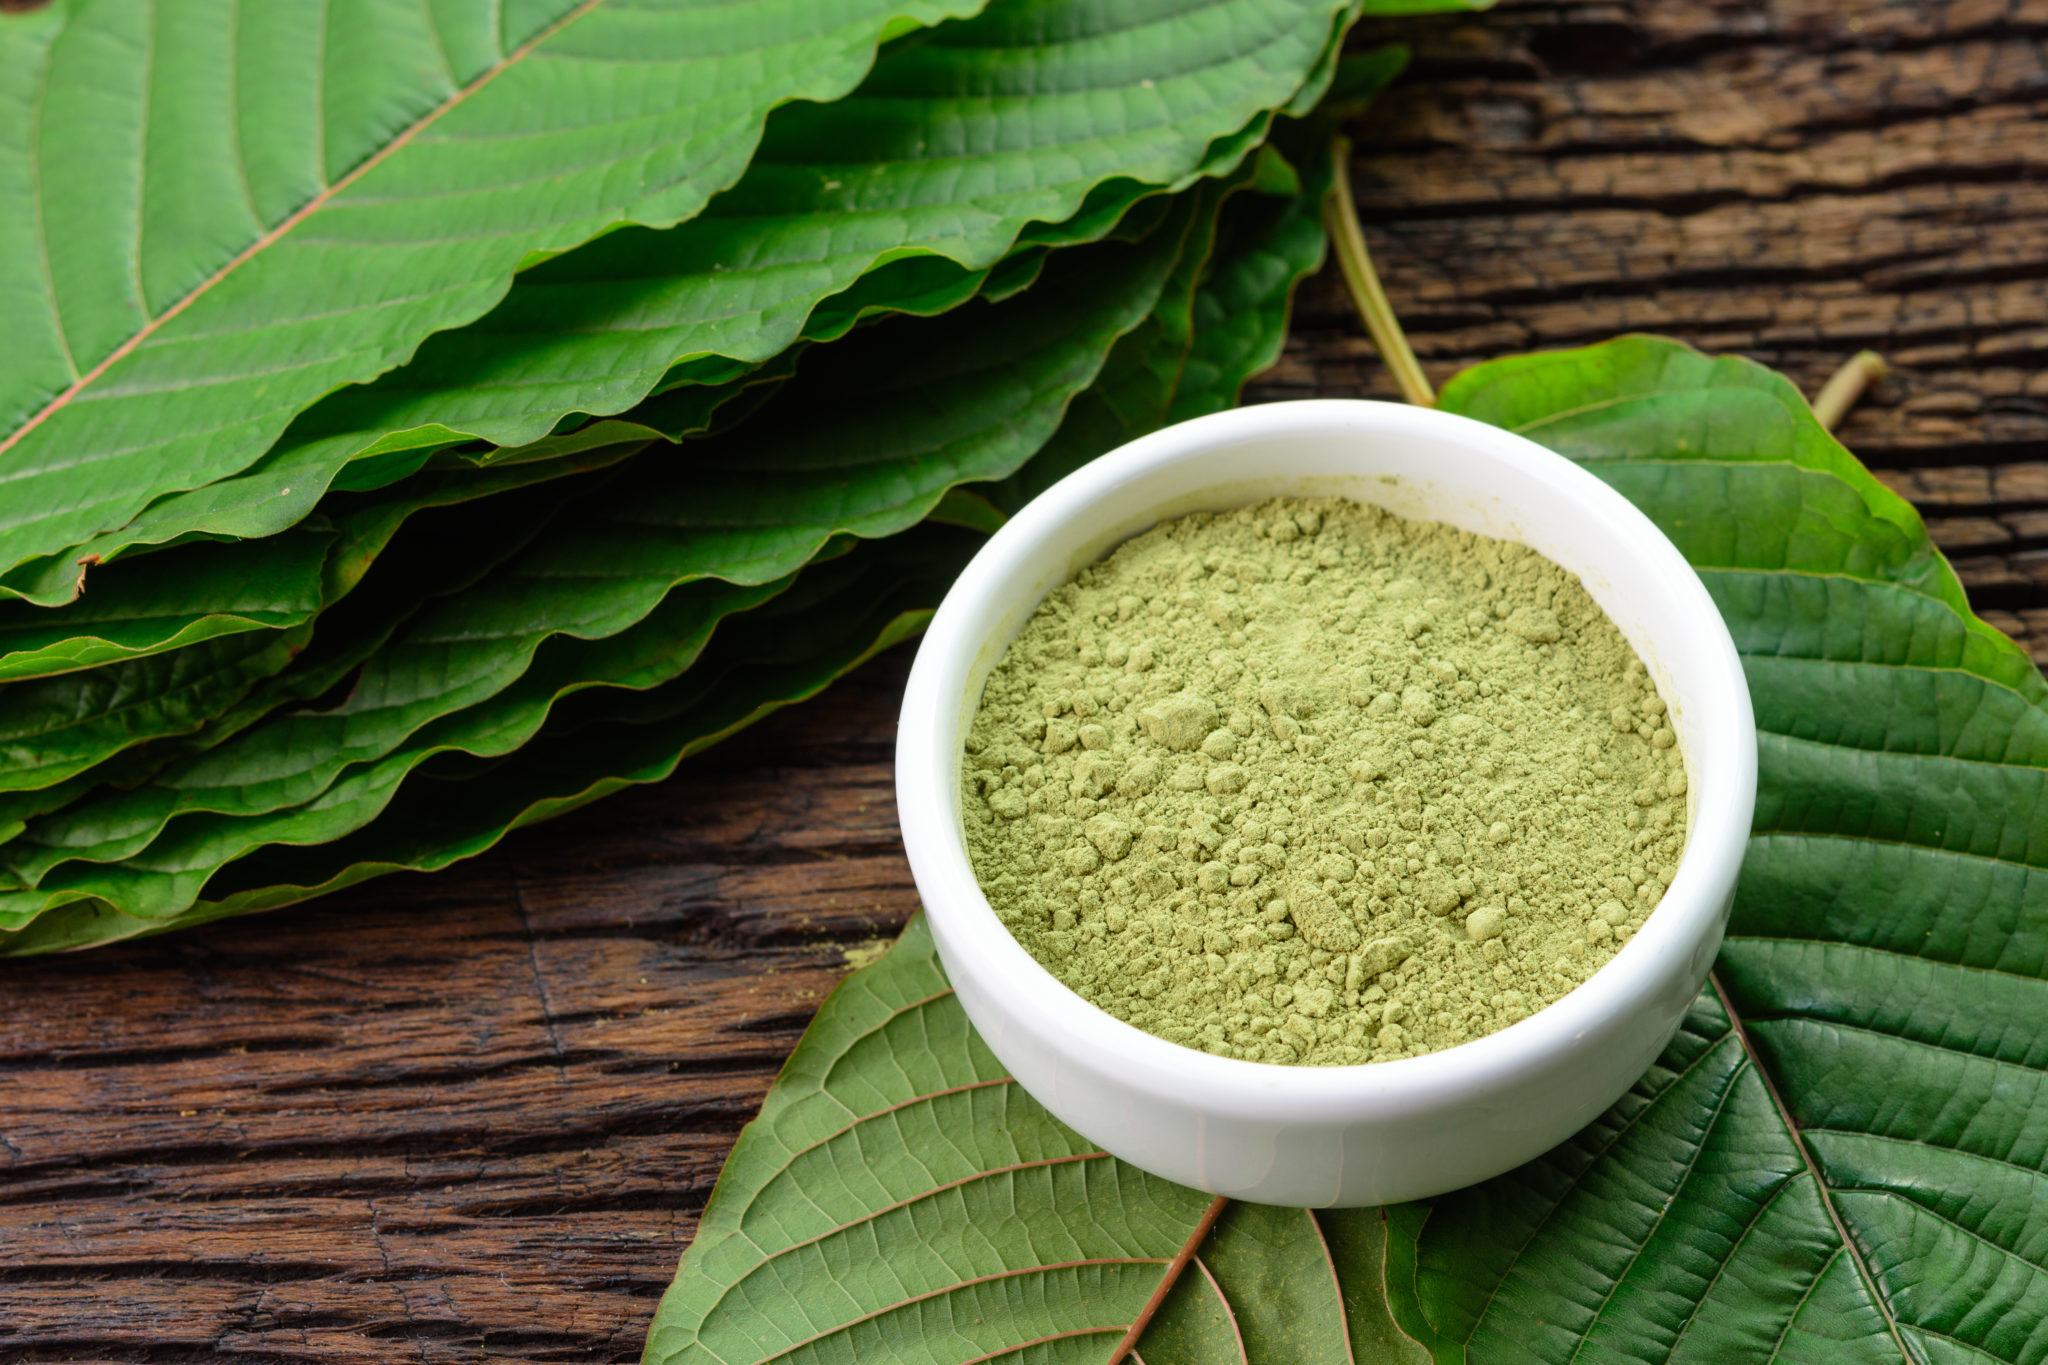 When comparing CBD vs. Kratom, one major difference is that CBD is non-addictive and appears safe even at relatively high doses, while kratom can pose risks of dependency and other side effects. Photo: Powdered kratom in a white bowl sits atop whole mitragyna speciosa leaves.